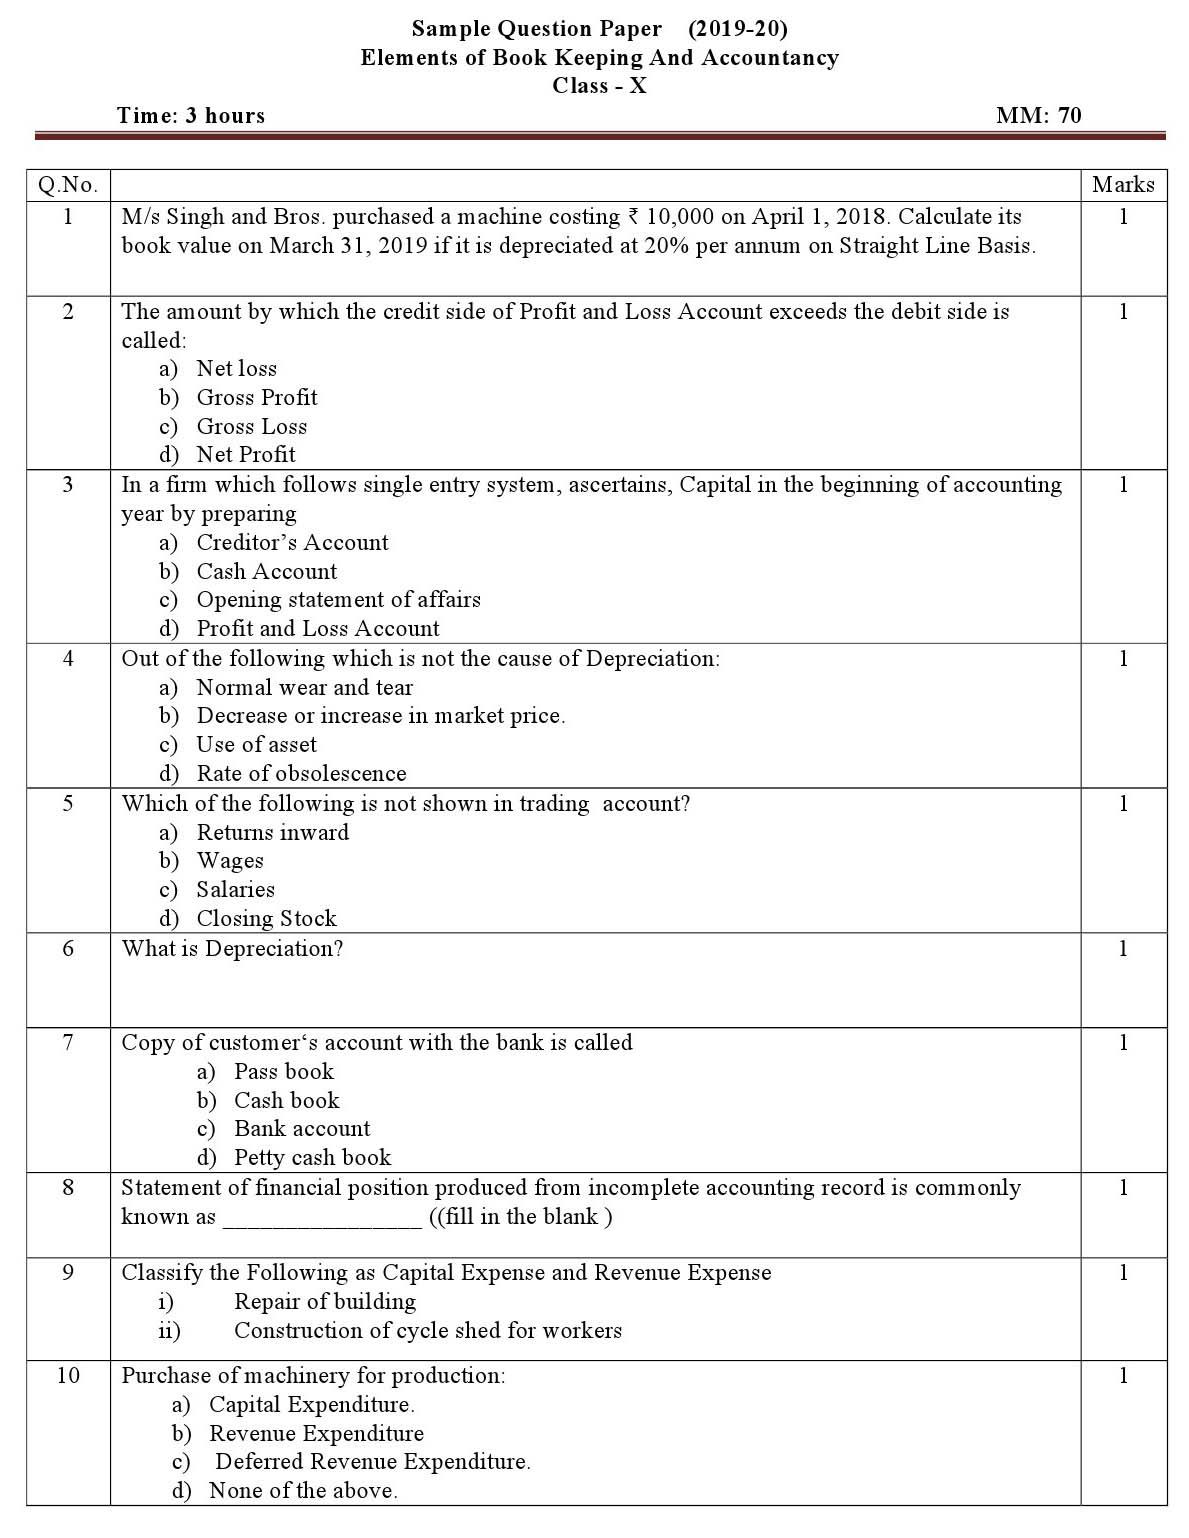 Elements of Book Keeping And Accountancy CBSE Class X Sample Question Paper 2019 20 - Image 1